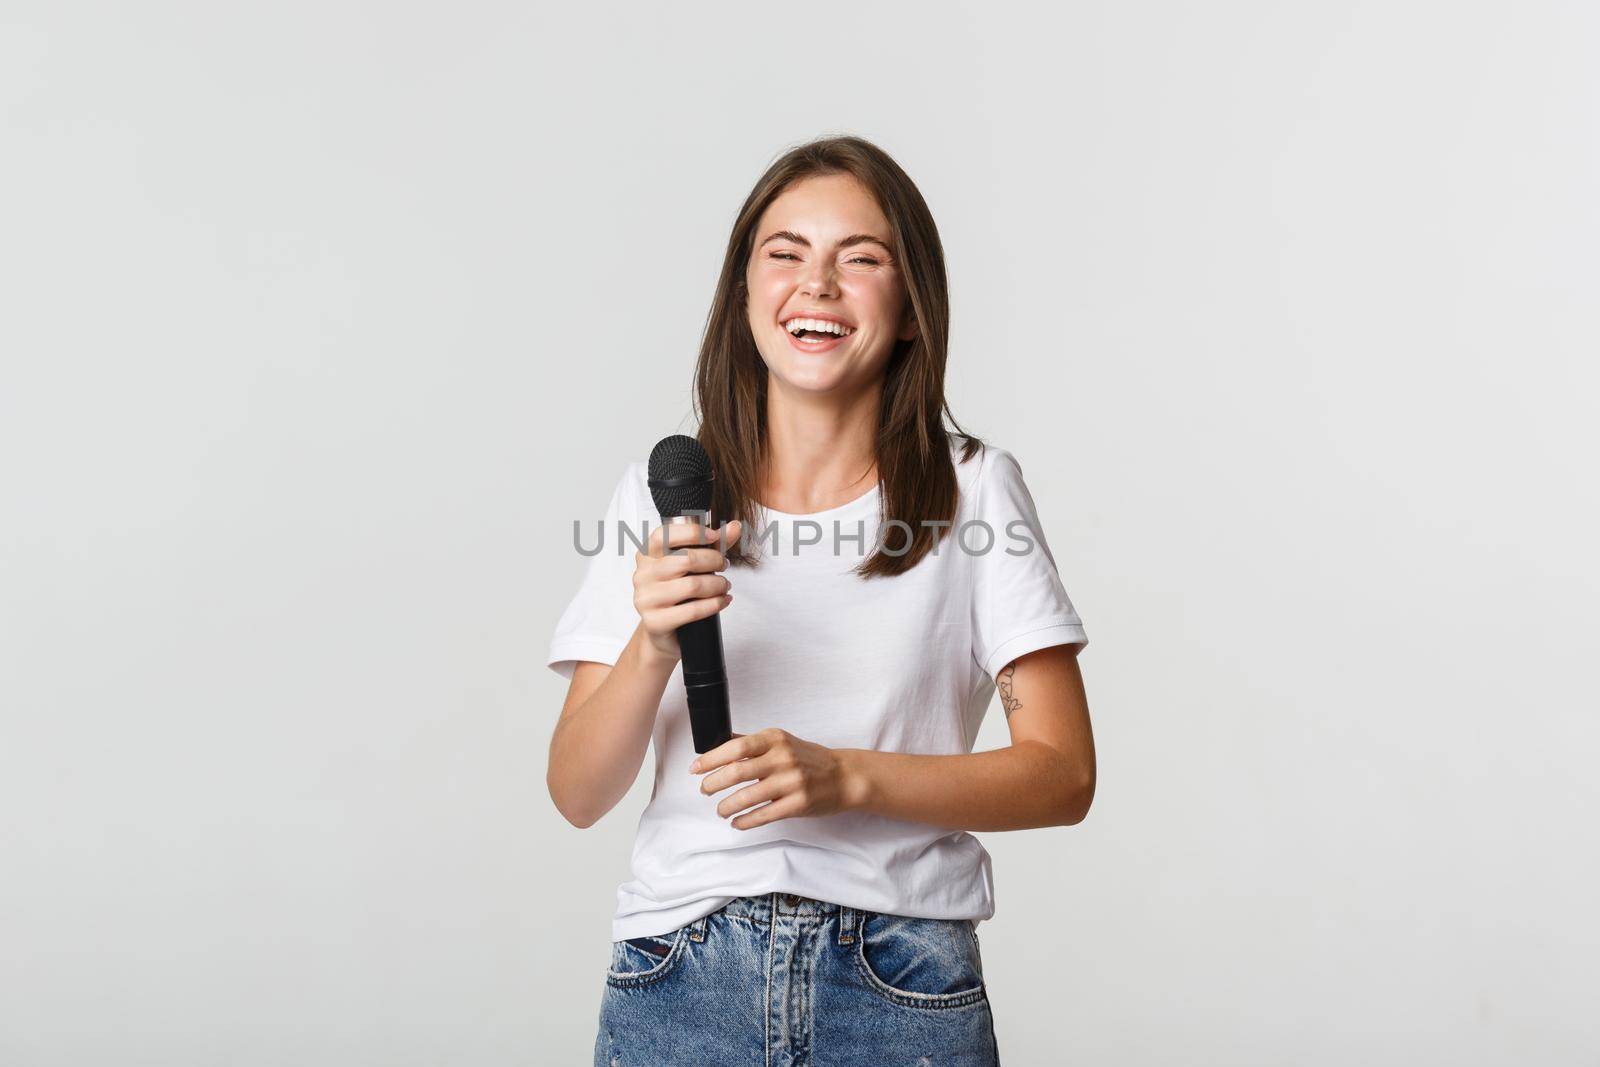 Happy laughing girl holding microphone and singing karaoke, white background.